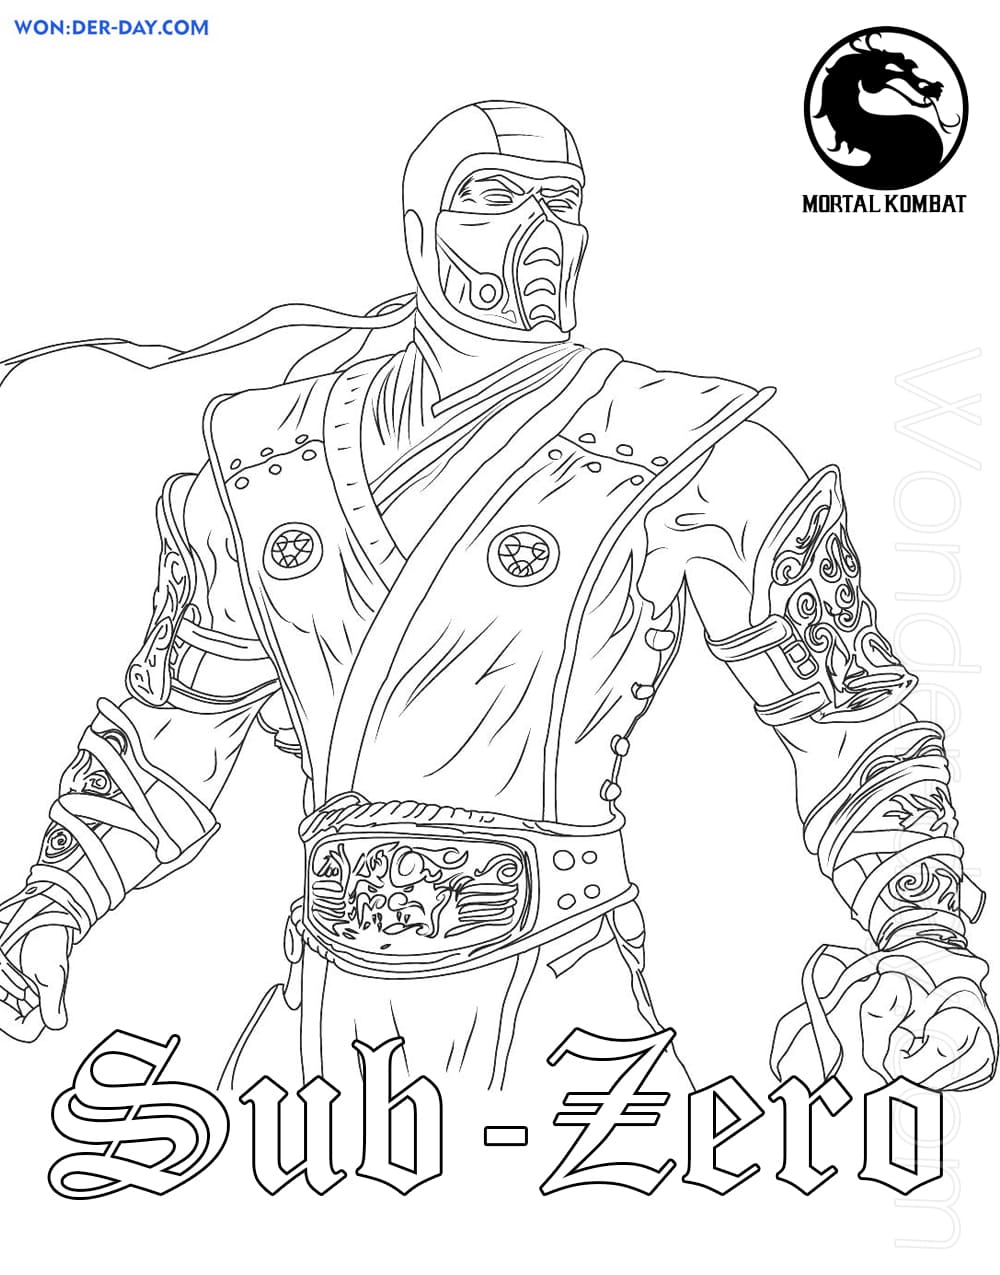 sub zero coloring pages 90 free wonder day for children and adults lol coloriage punk boy